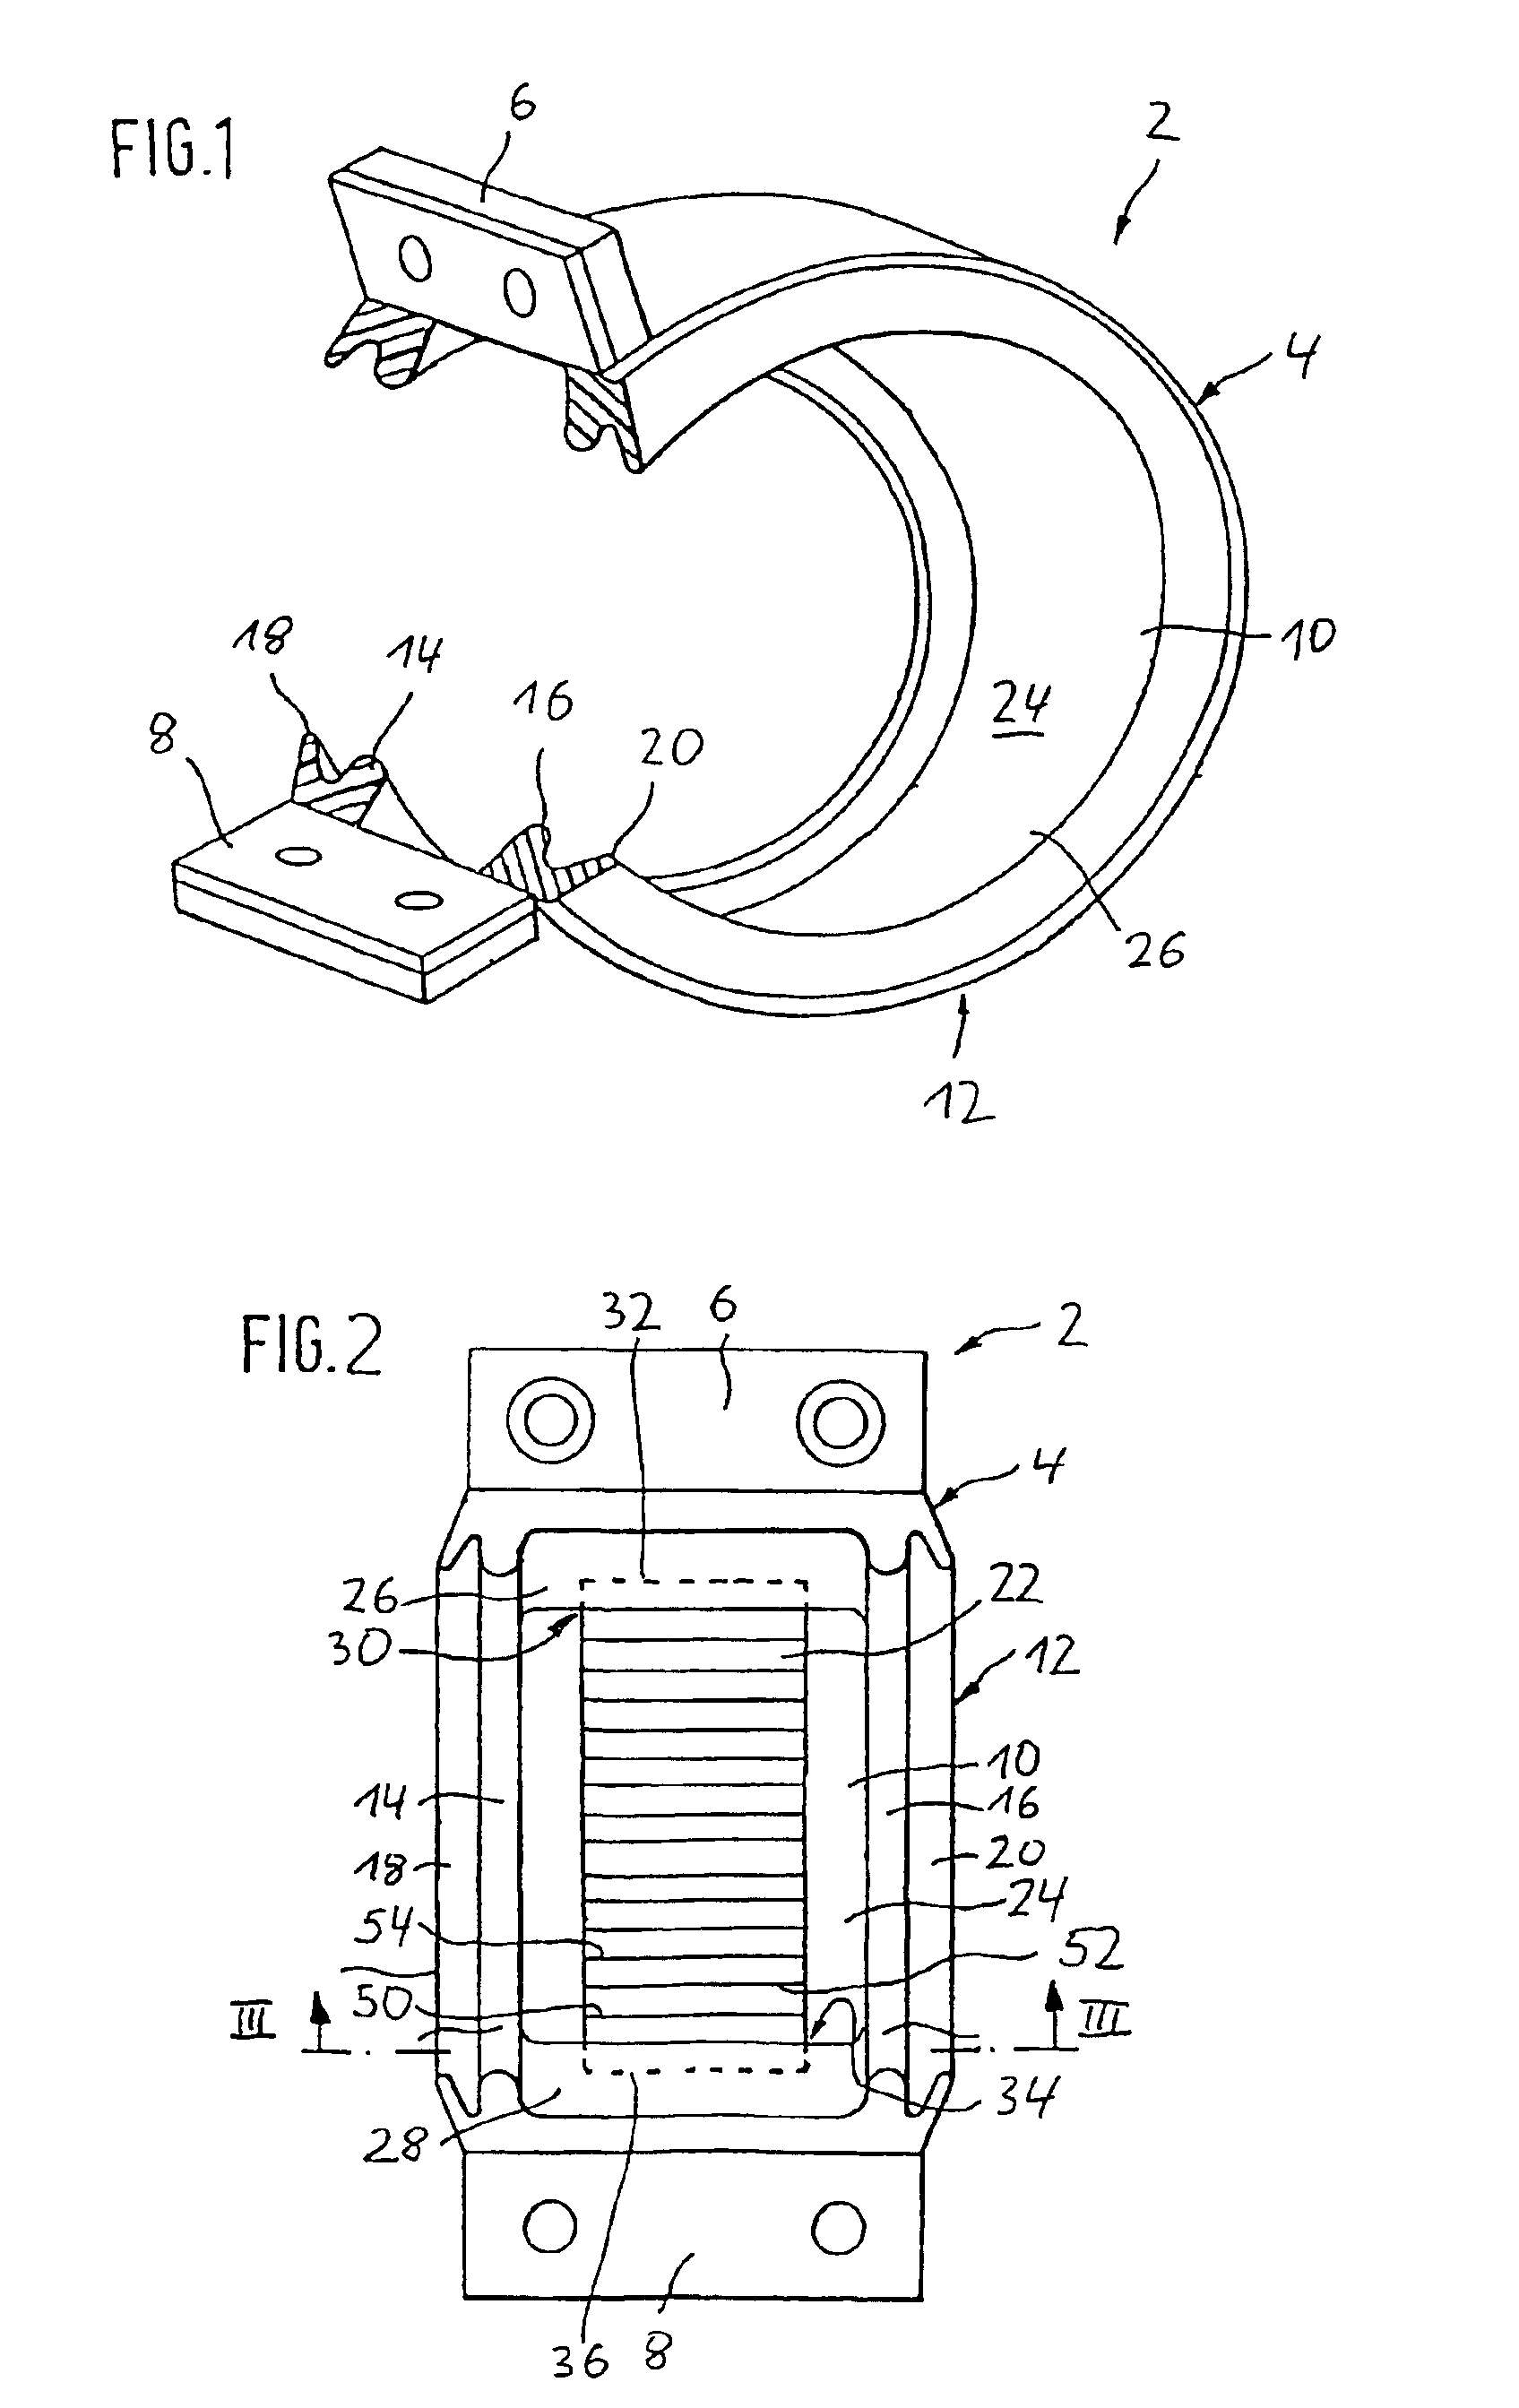 Electrically conductive pipe or cable clip